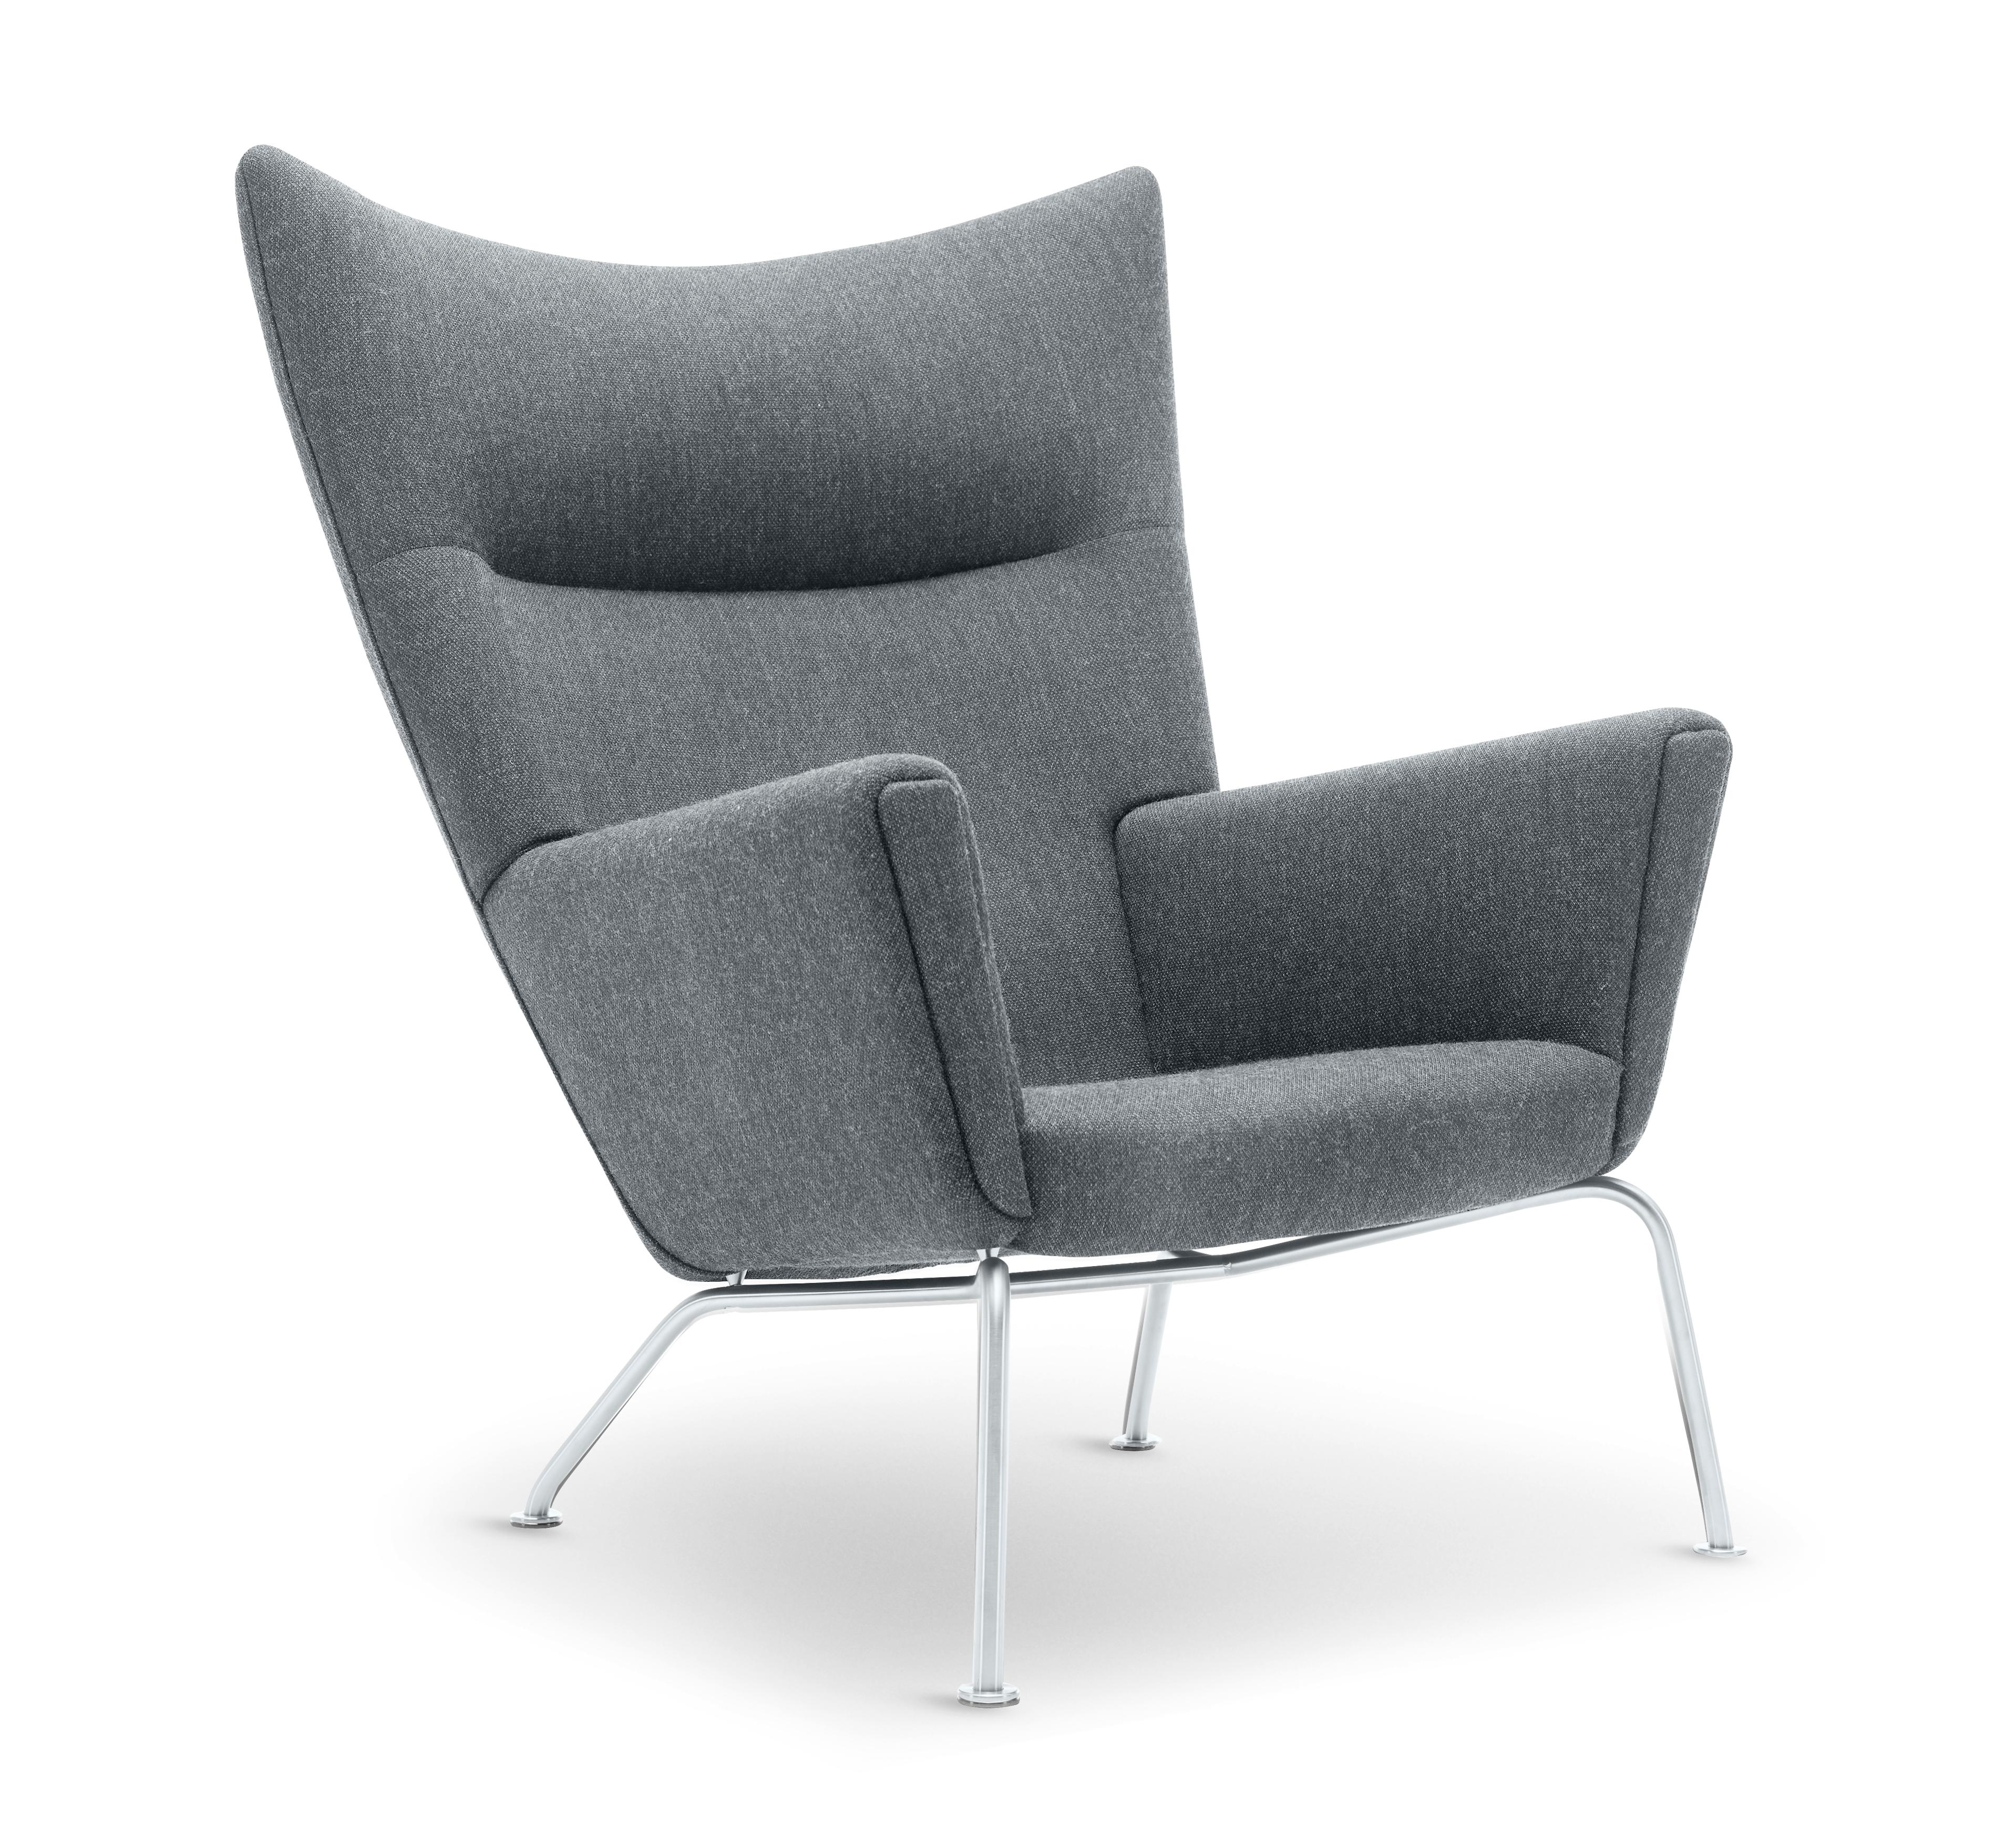 Gray (Kvadrat Fiord 151) CH445 Wing Chair in Fabric with Stainless Steel Base by Hans J. Wegner 2